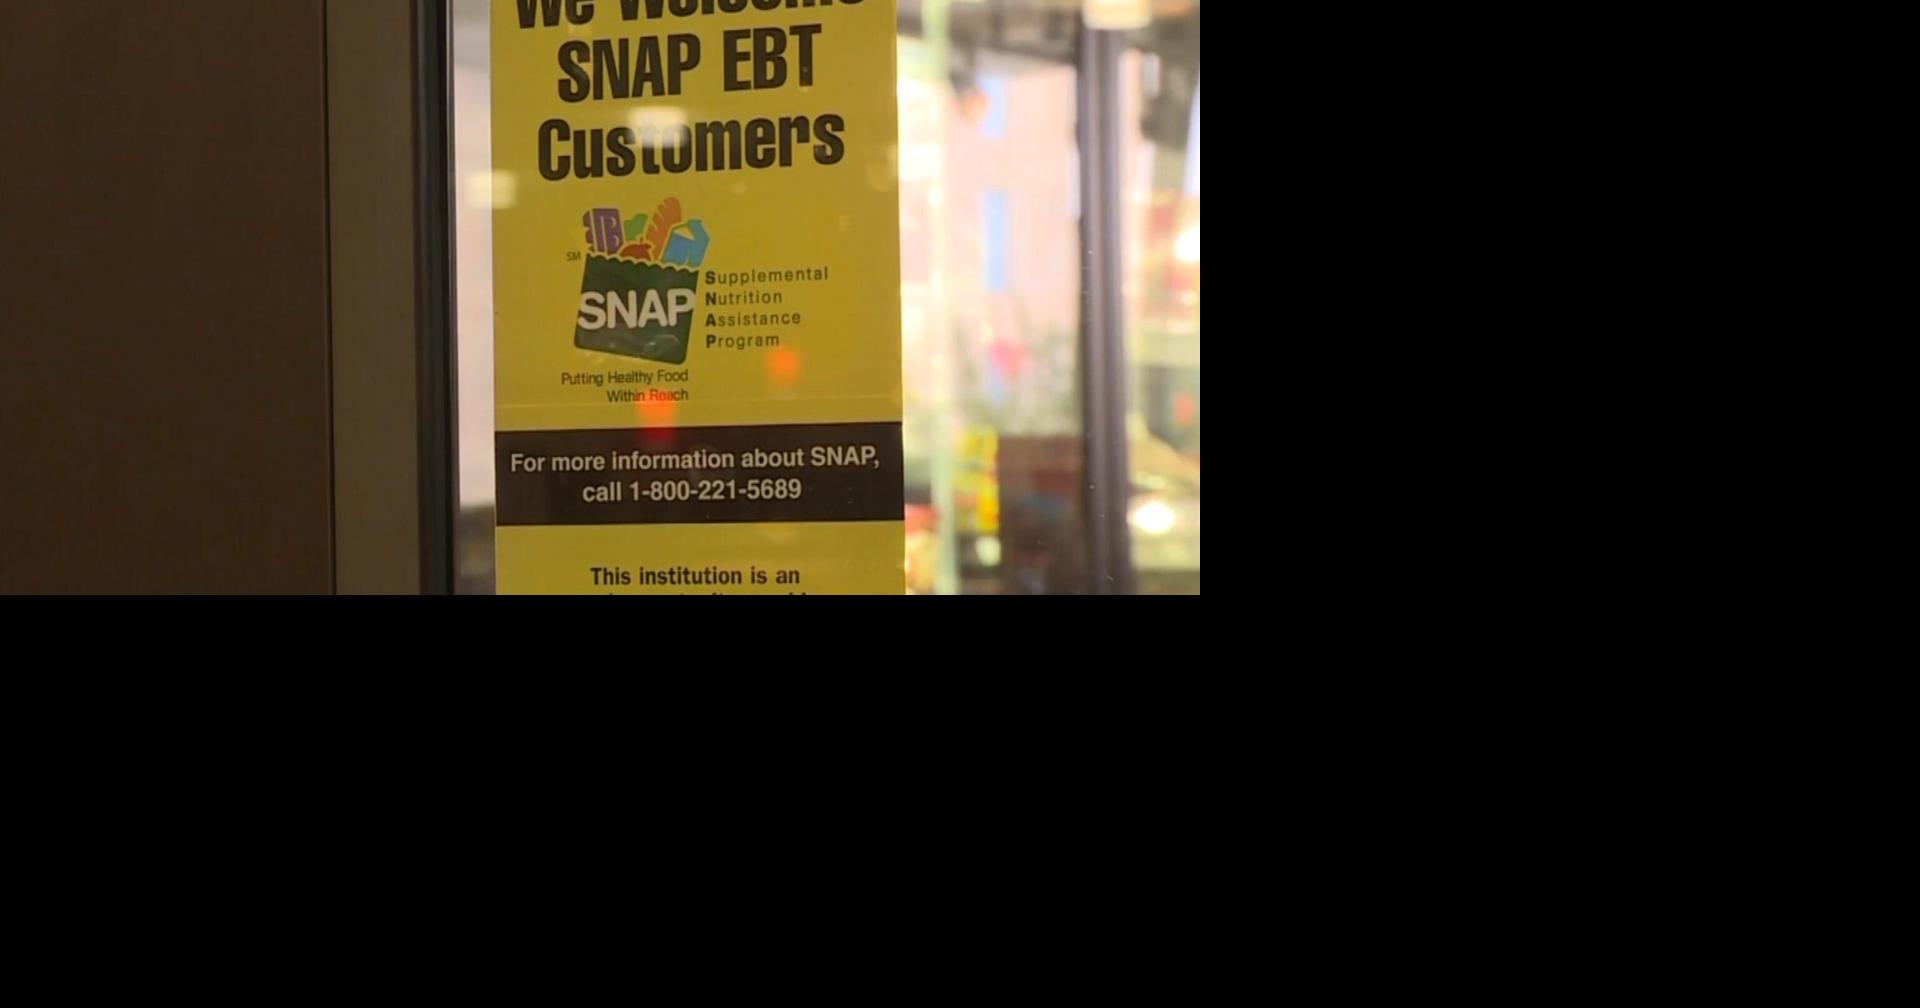 Delaware to Issue Emergency Benefits on Aug. 25 to All SNAP and Other Eligible Households